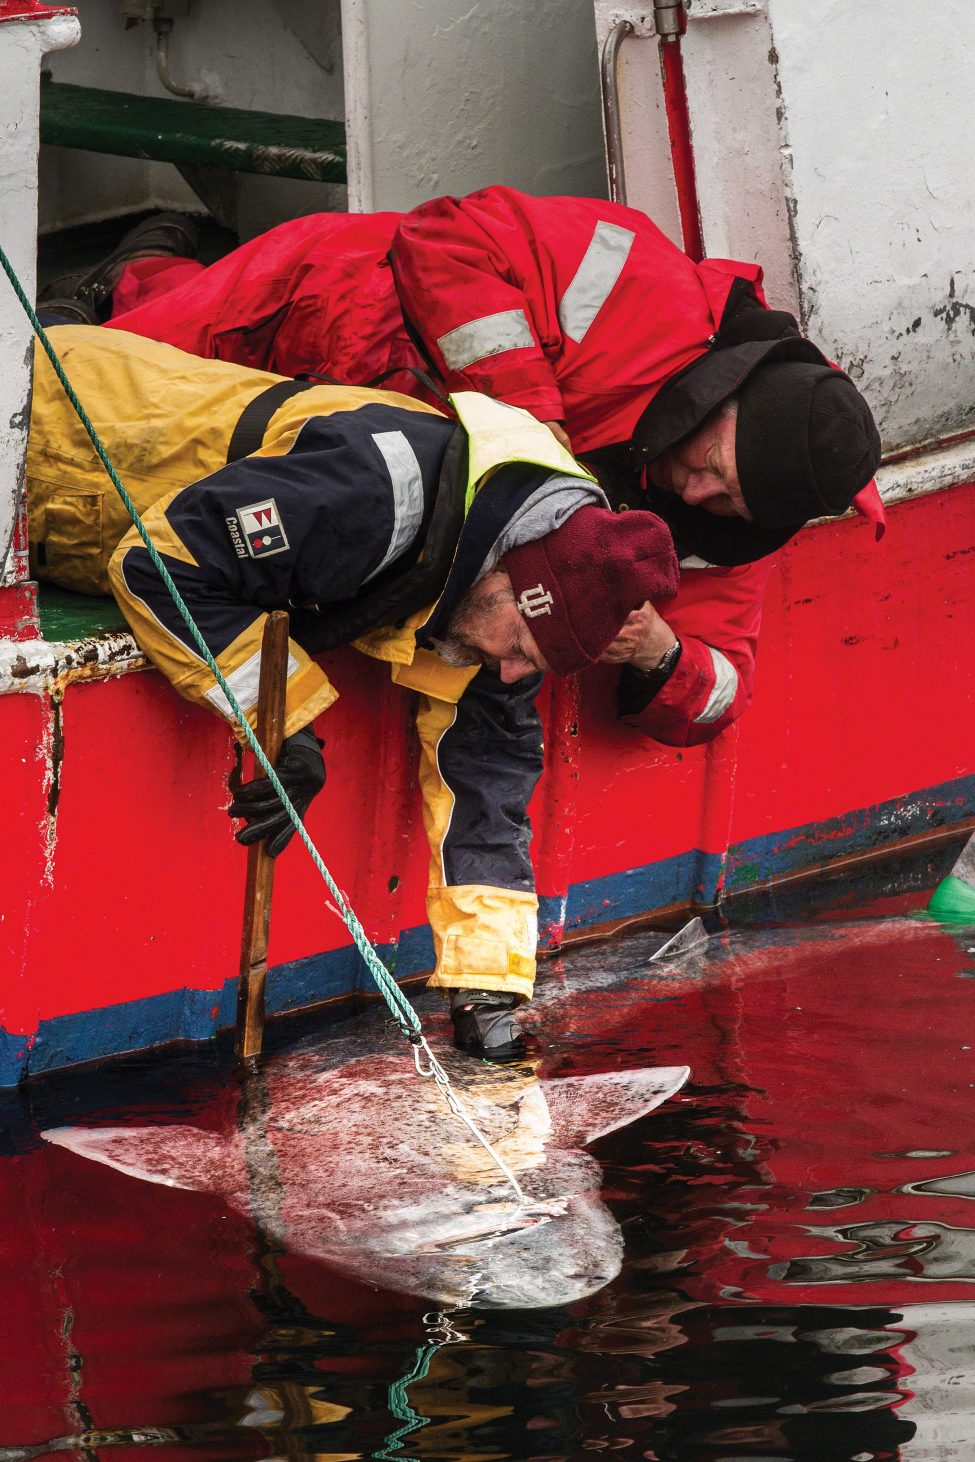 Peter Bushnell leans out of the research vessel to unhook an upside-down Greenland shark.<br />
Photo by Lucas Santucci | Under the Pole